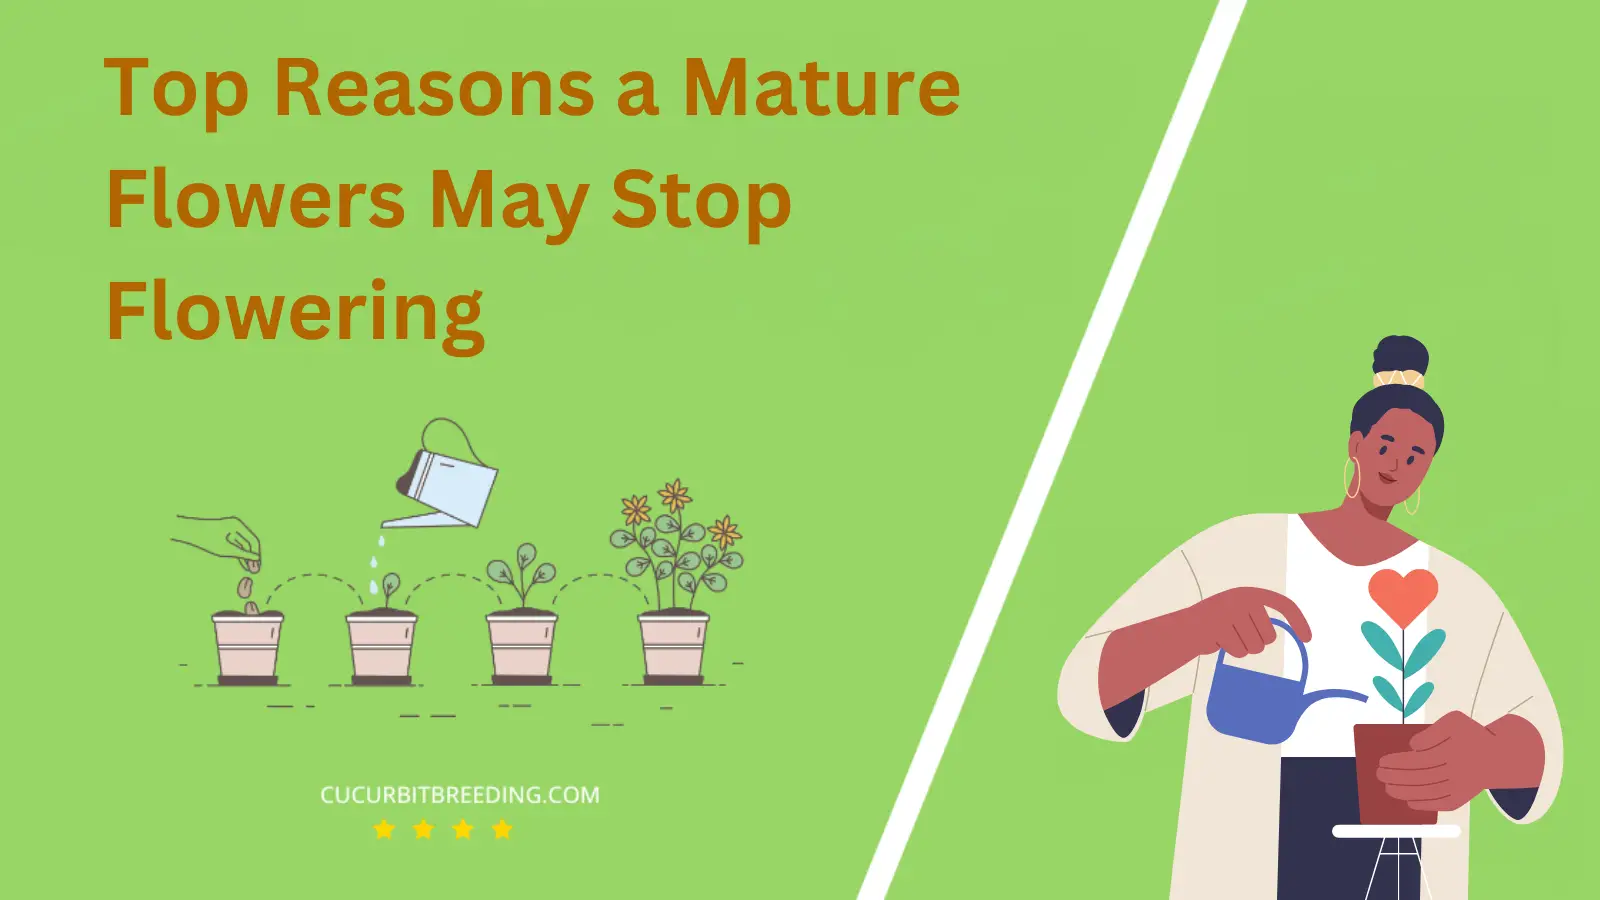 Top Reasons a Mature Flowers May Stop Flowering